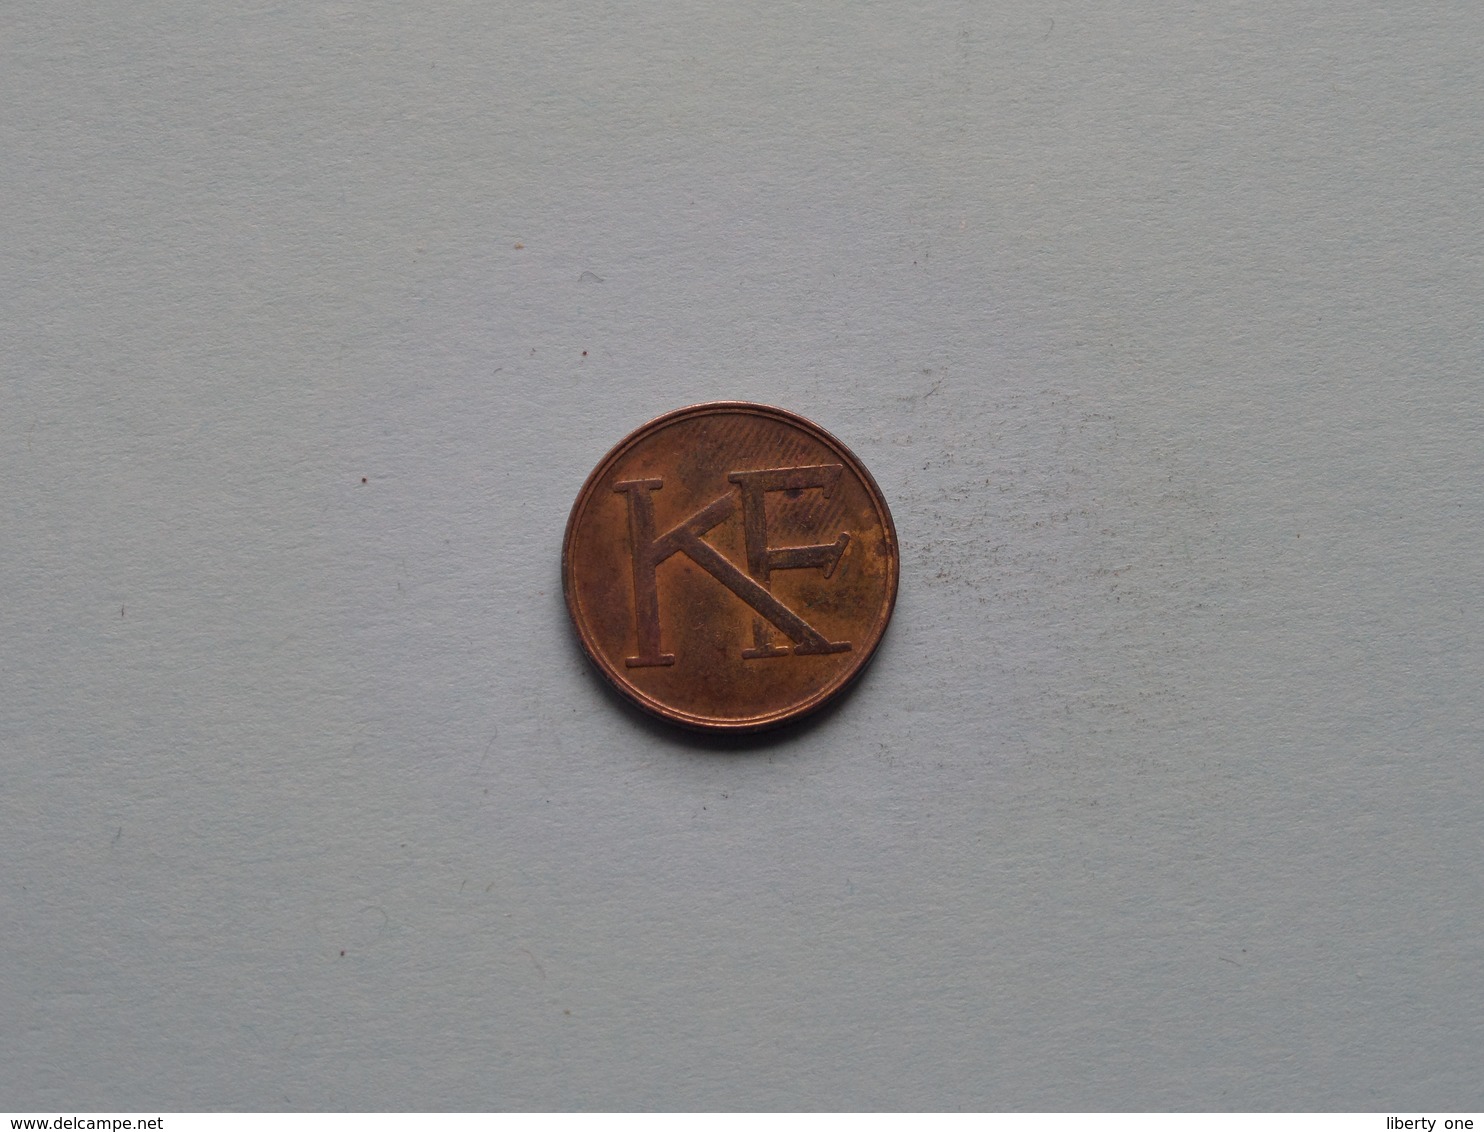 KF ( Jeton / Token ) Elevator > Stockholm Mining ( Uncleaned Coin / For Grade, Please See Photo ) ! - Professionals / Firms